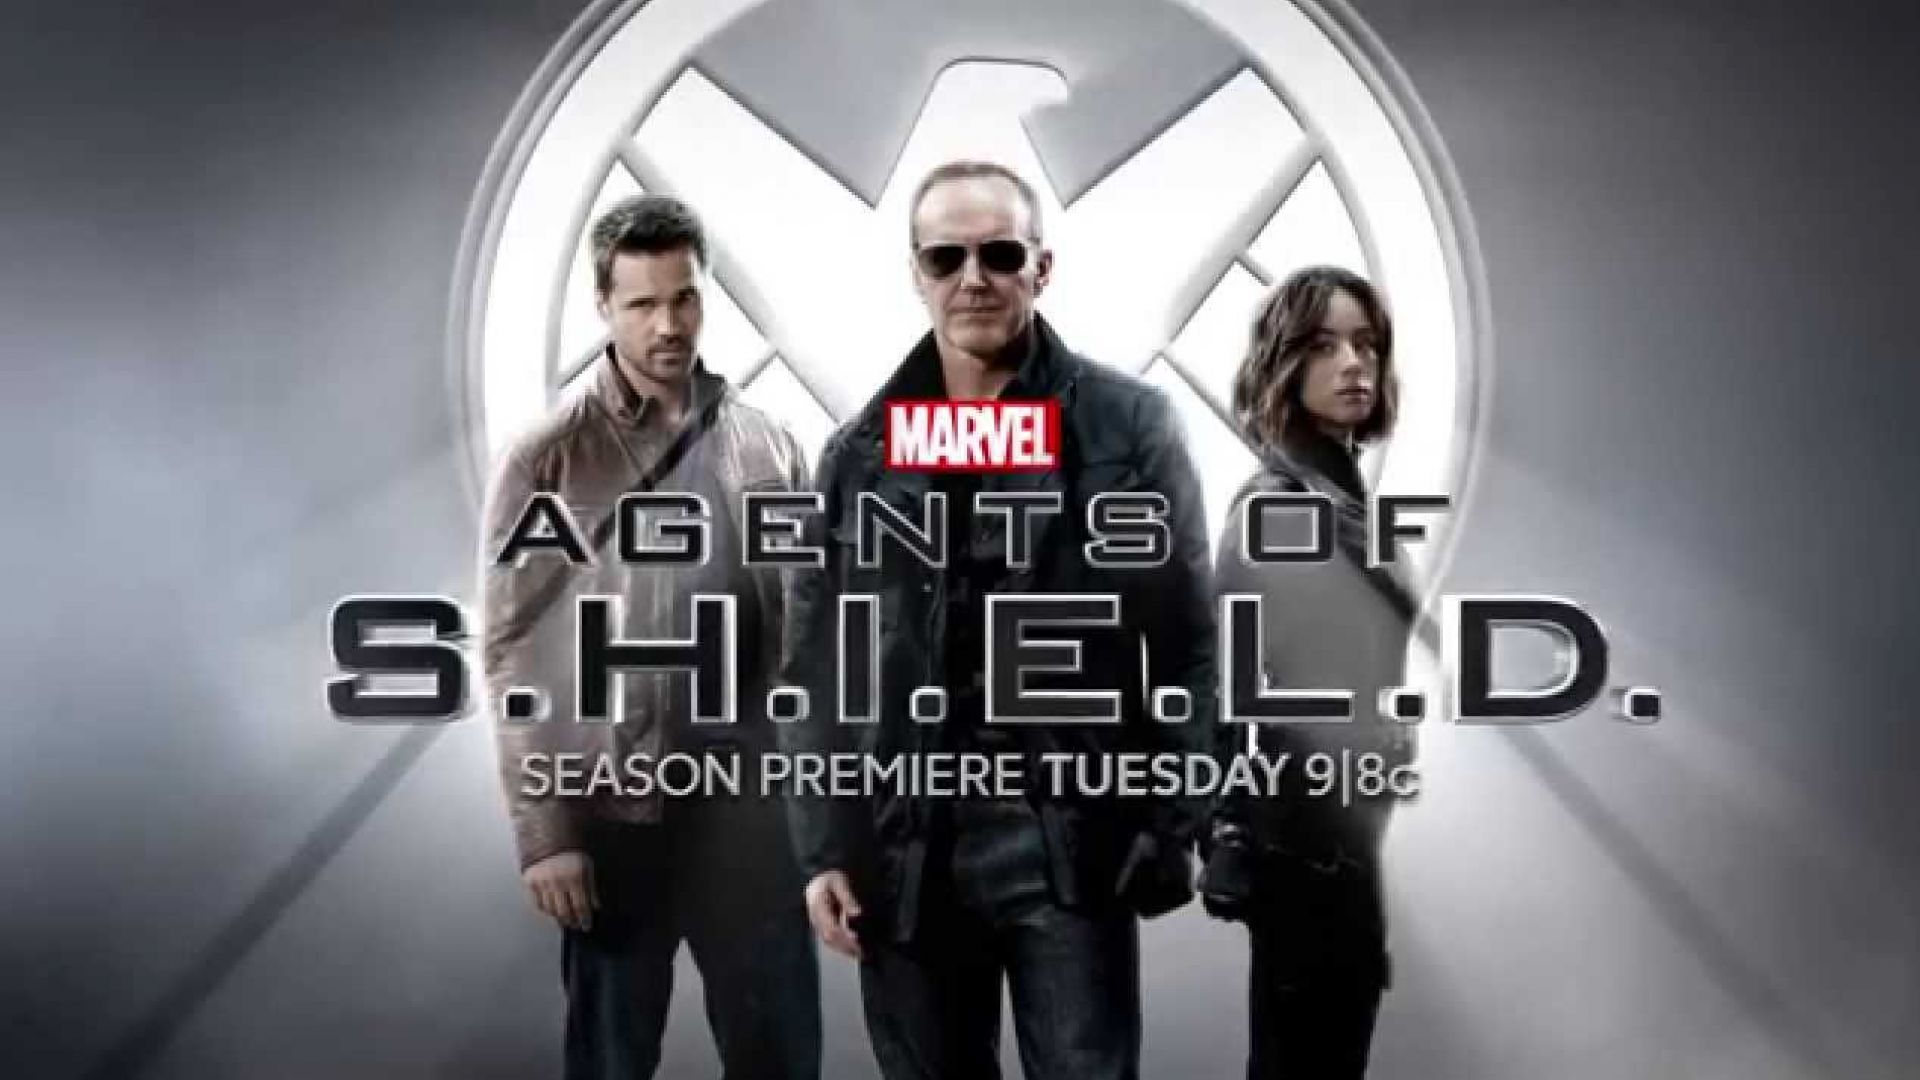 Watch the Marvel&#039;s Agents of S.H.I.E.L.D. Season 3 Opening S